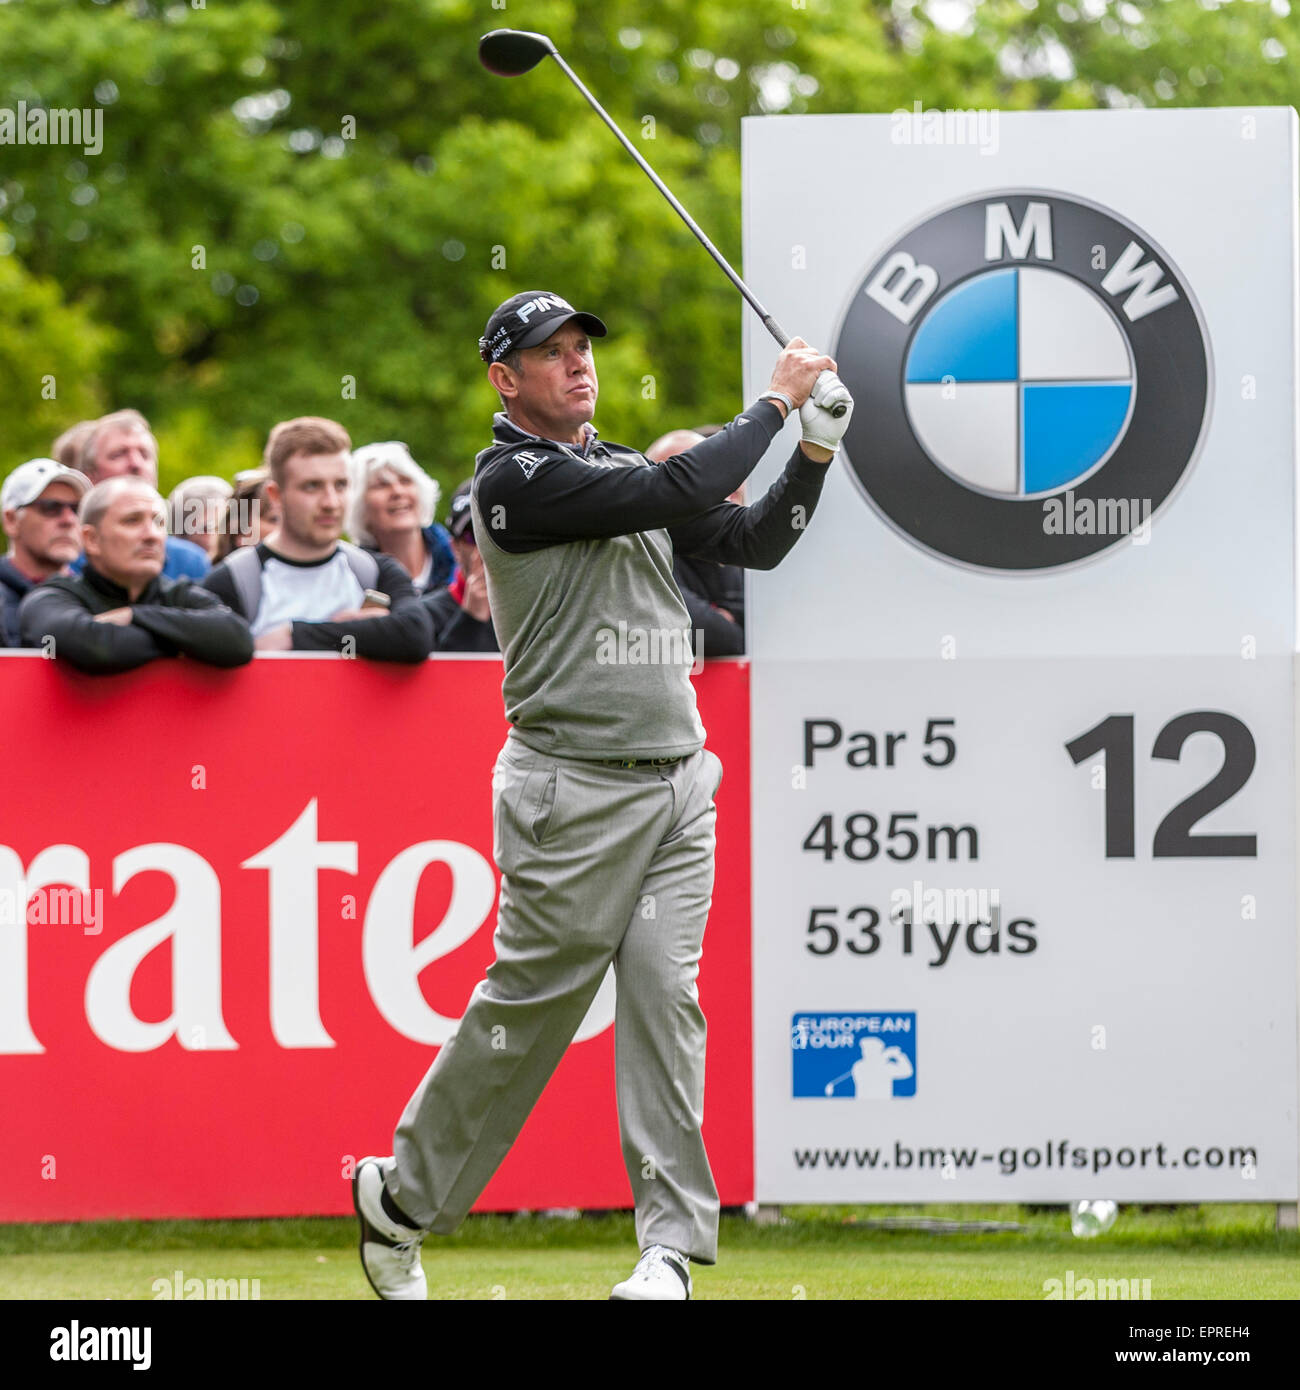 London, UK. 20 May 2015.  Lee Westwood (England) tees off during the BMW PGA Championship 2015 Pro-Am at Wentworth club, Surrey. Credit:  Stephen Chung / Alamy Live News Stock Photo